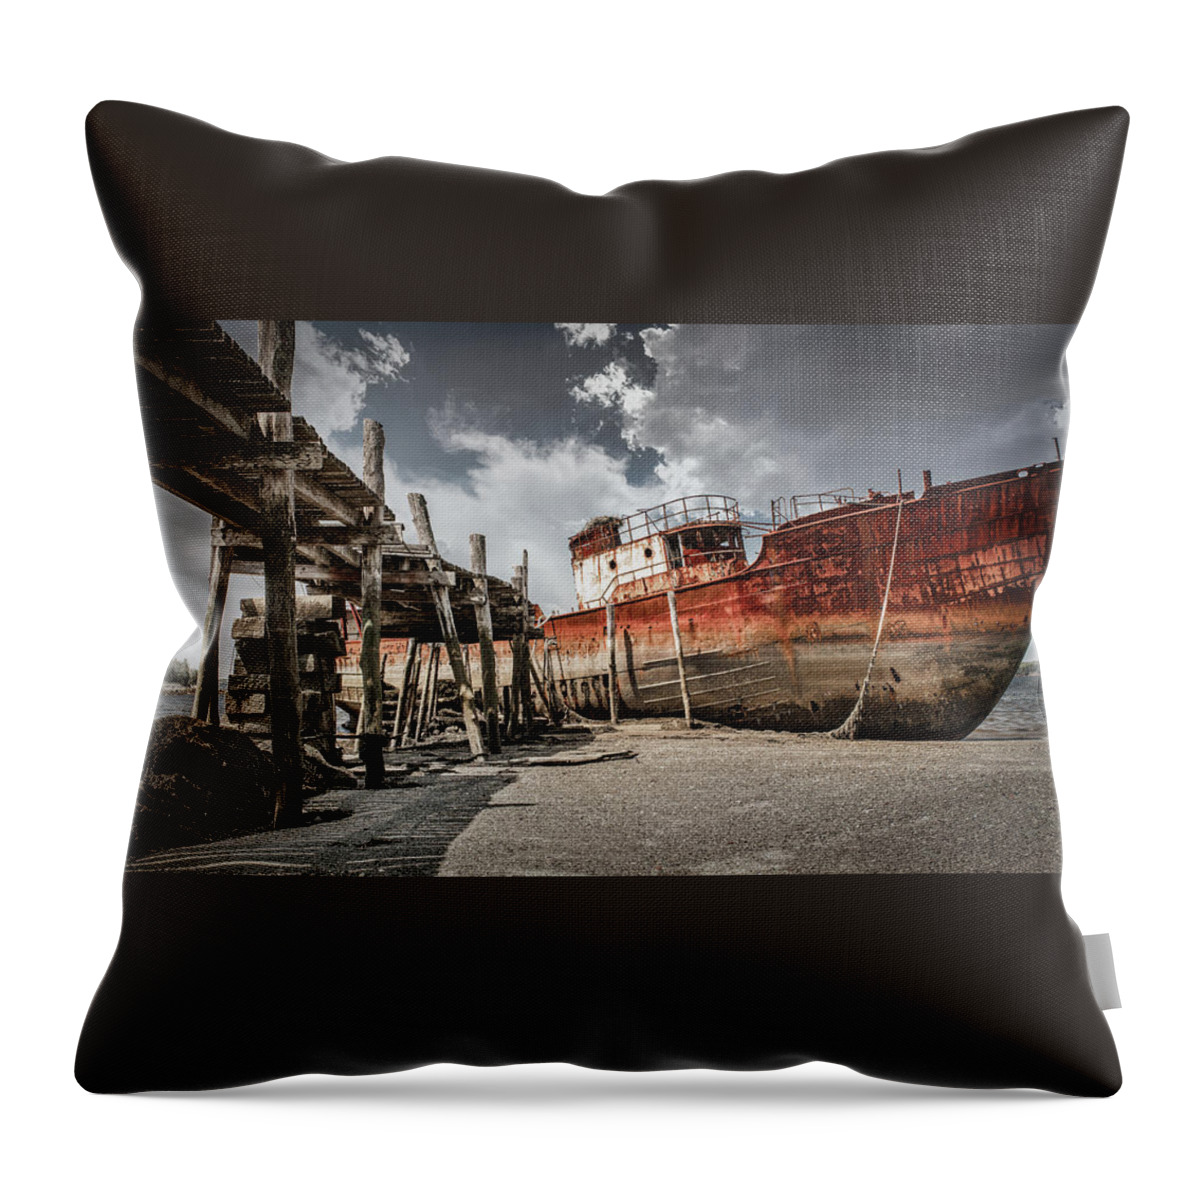 Maine Coast Throw Pillow featuring the photograph Lonely Ending by Ron Long Ltd Photography